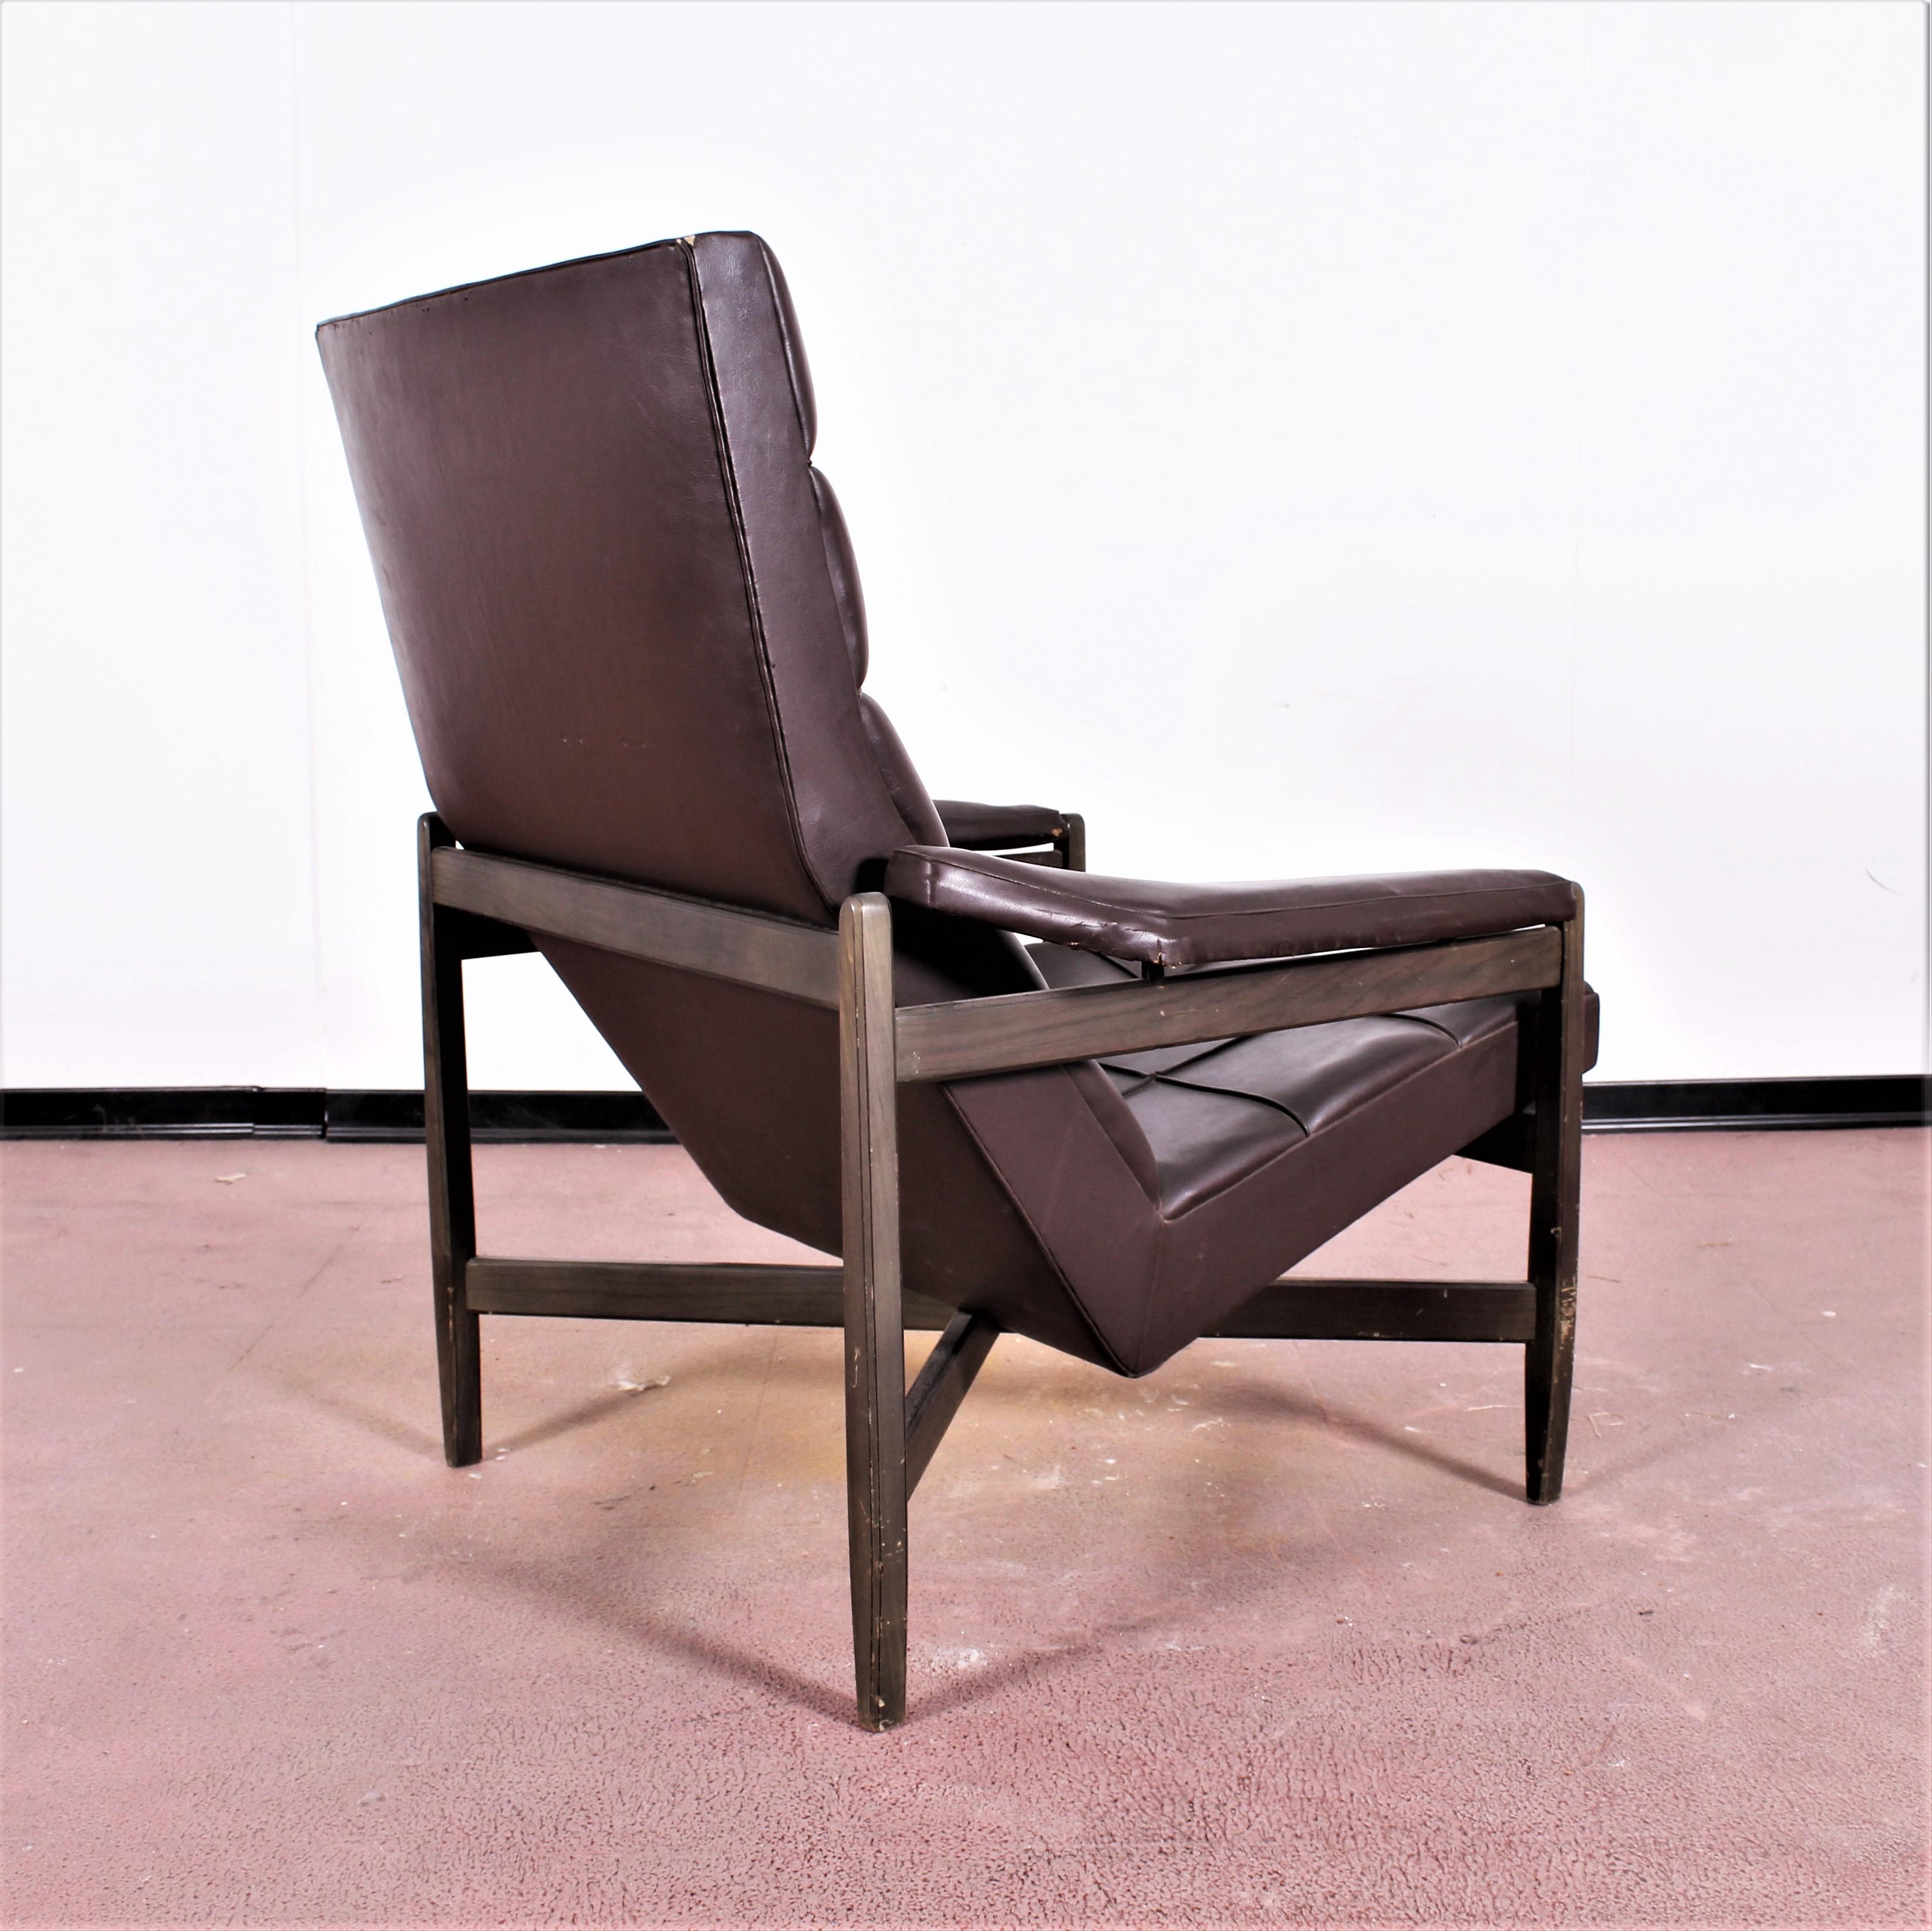 Mid-20th Century Wood and Brown Leather Minotti Lounge Chair and Ottoman, Italy, 1960s